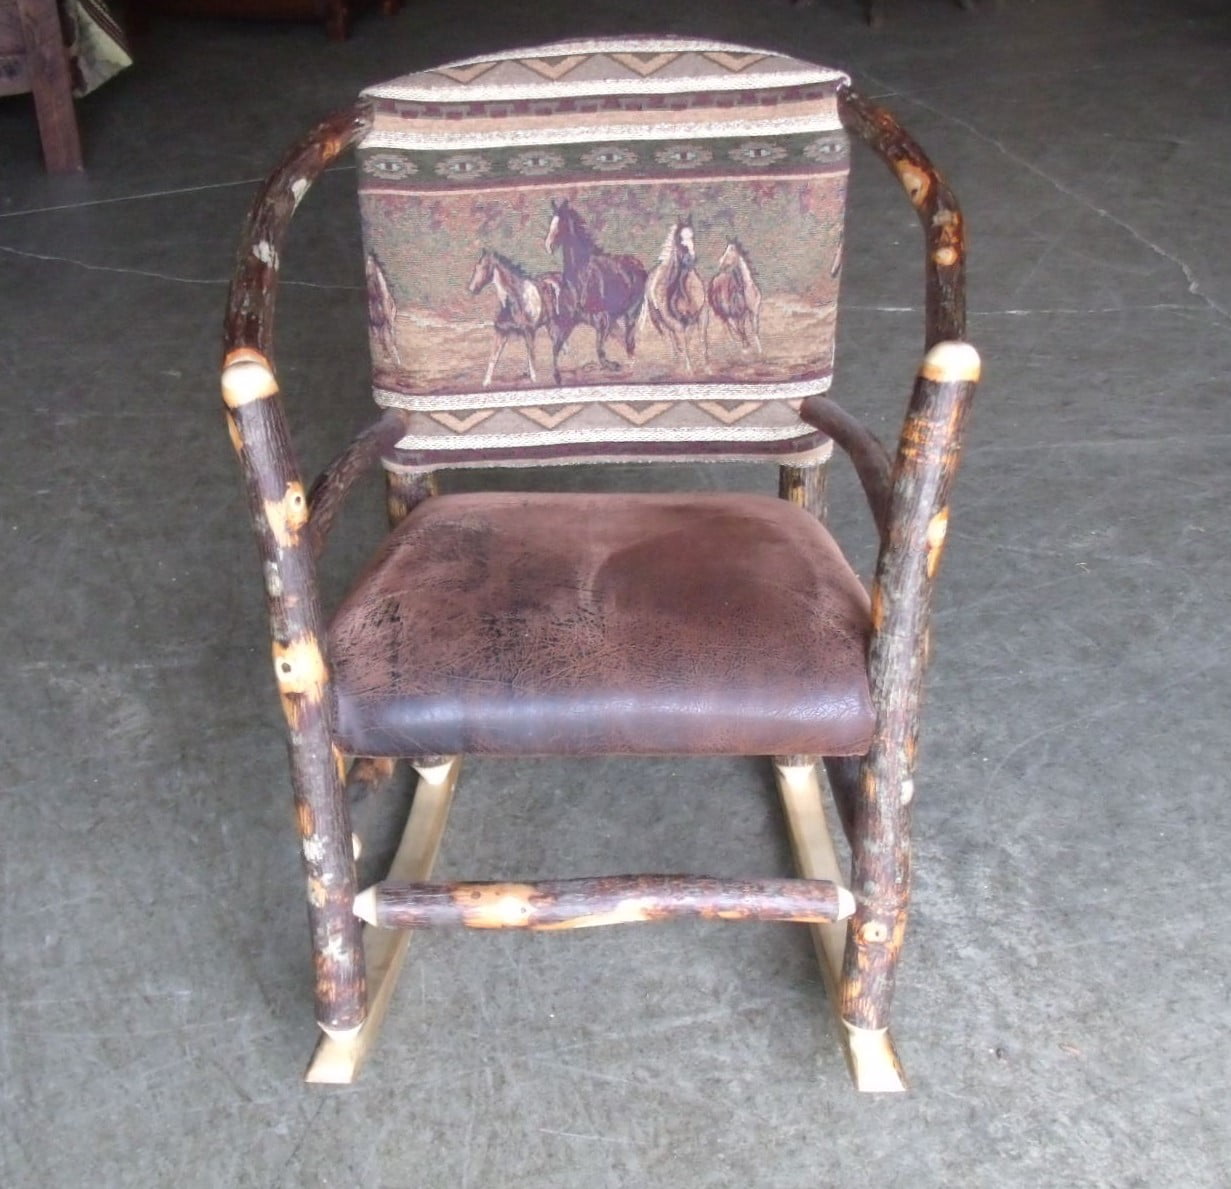 Rustic Hickory Hoop Rocking Chair - Faux Brown Leather Seat & Upholstered Back